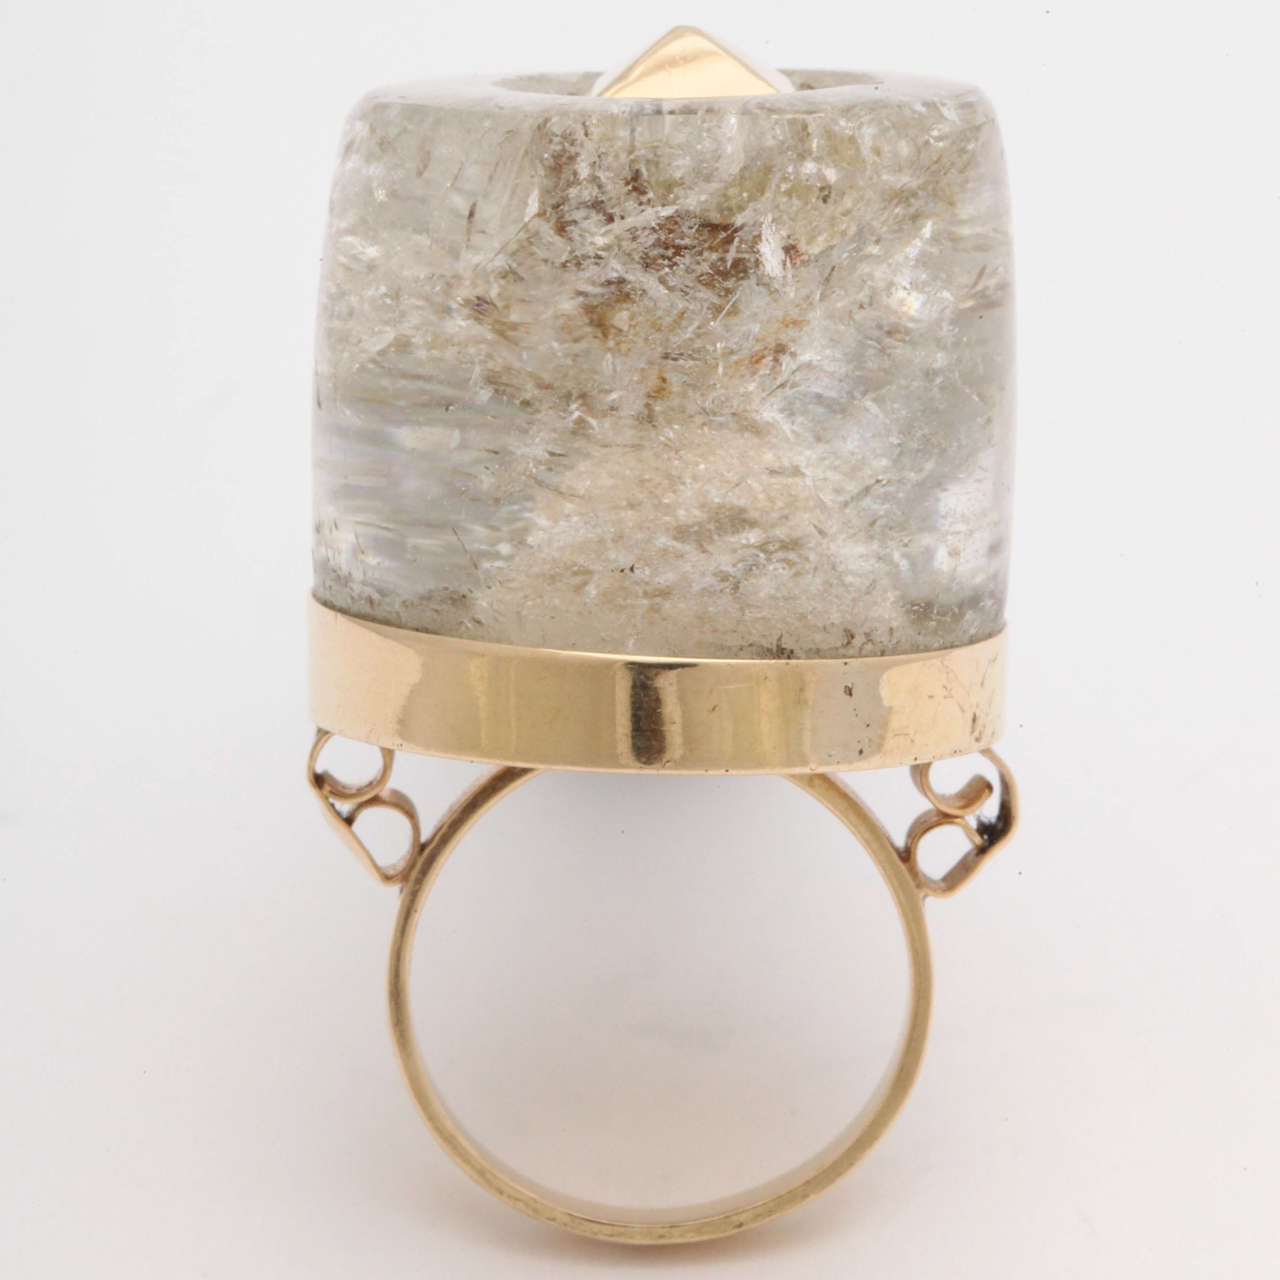 18 KT Yellow Gold Large Cocktail Ring Centering a 20 Carat, Three dimensional Rock Crystal Stone & Further Embellished with an 18KT Yellow Gold Studded Center.

Ring Size 7
American Made 1950's
Ring may be sized to any size